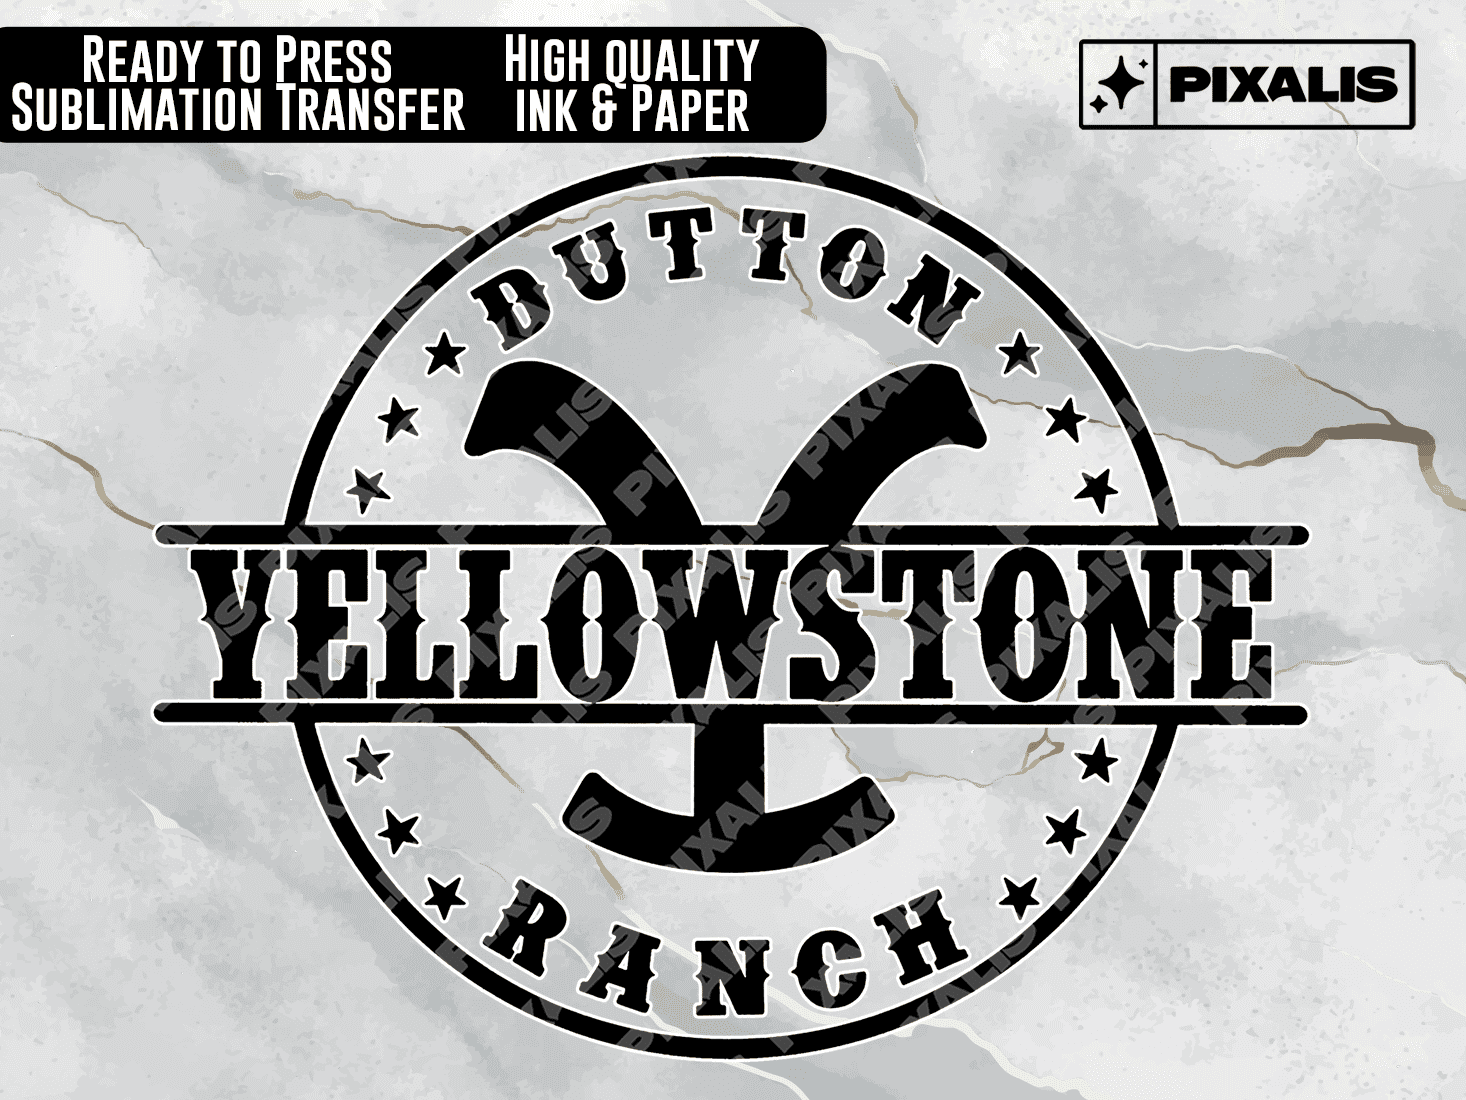 Yellowstone Dutton Ranch Emblem Ready to Press Sublimation Transfer | Pixalis | Sublimation Transfers